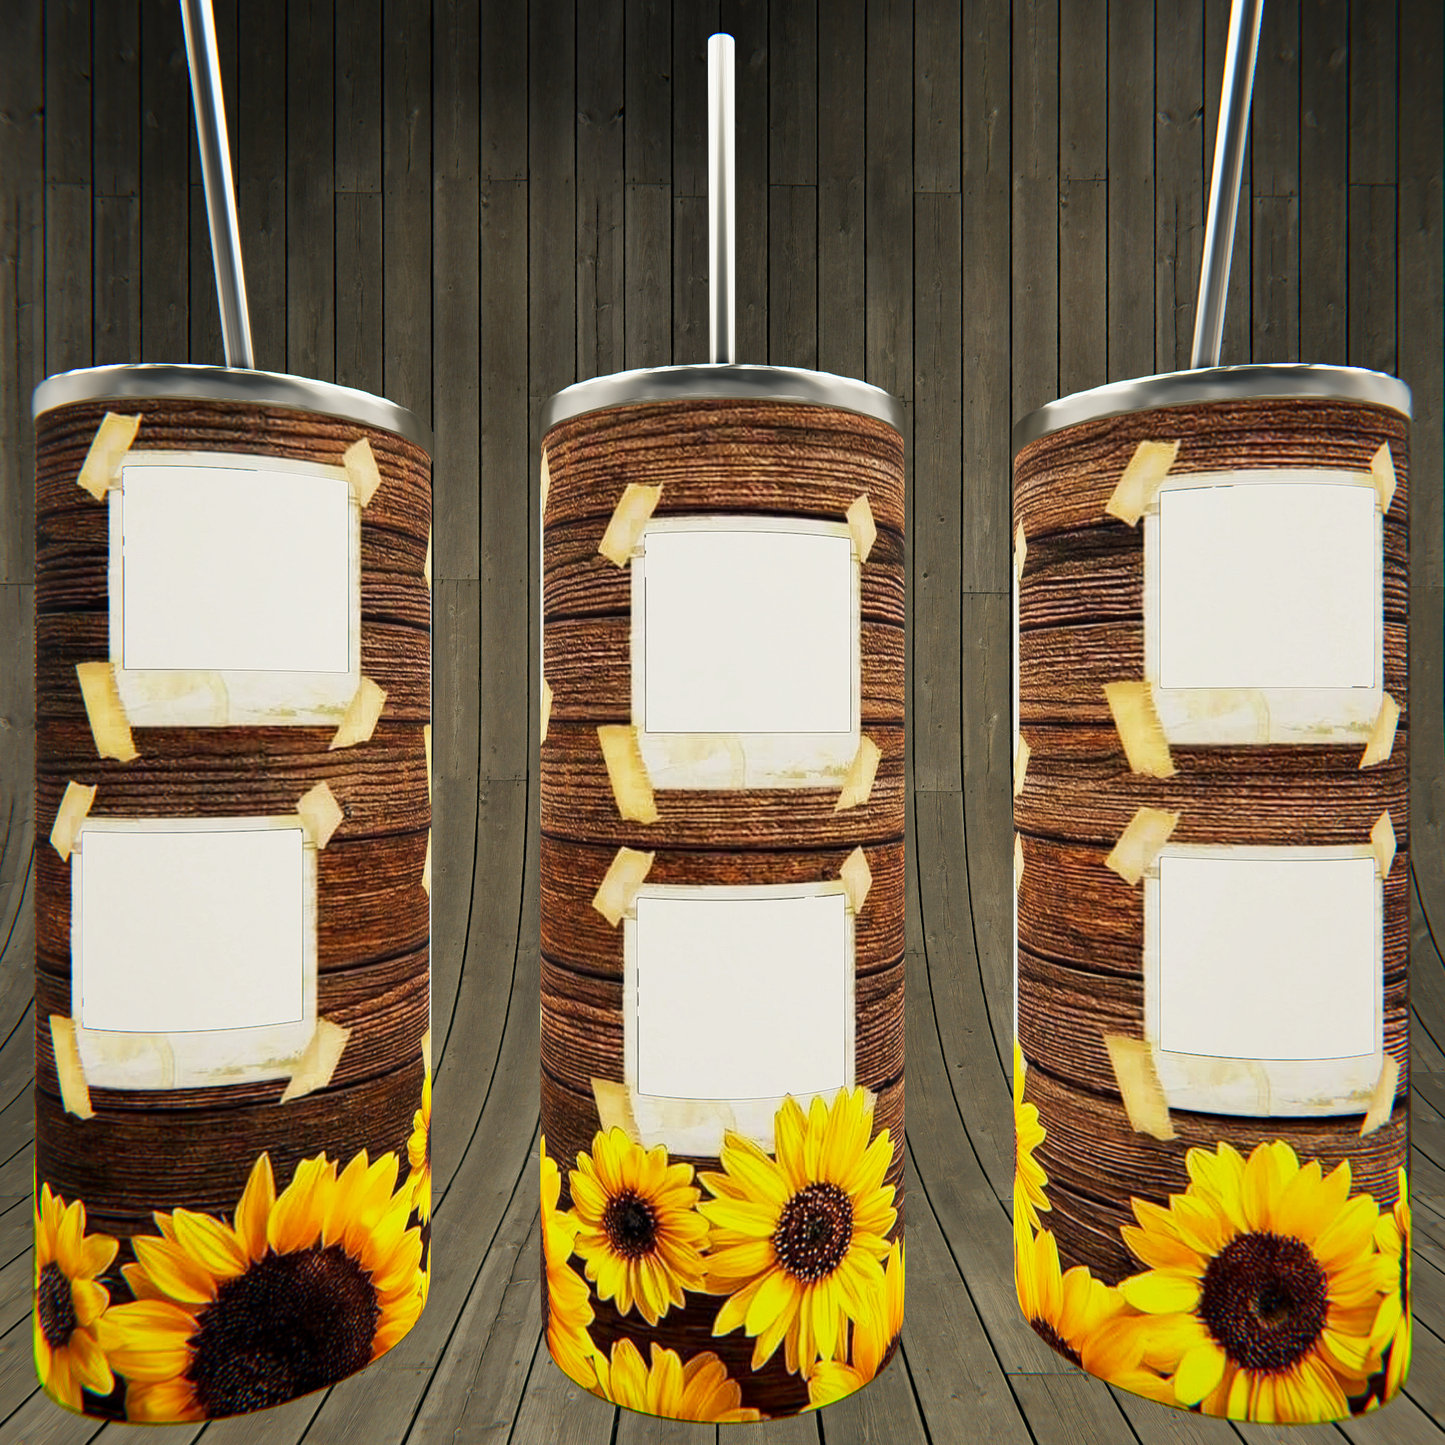 Sunflower with wood background